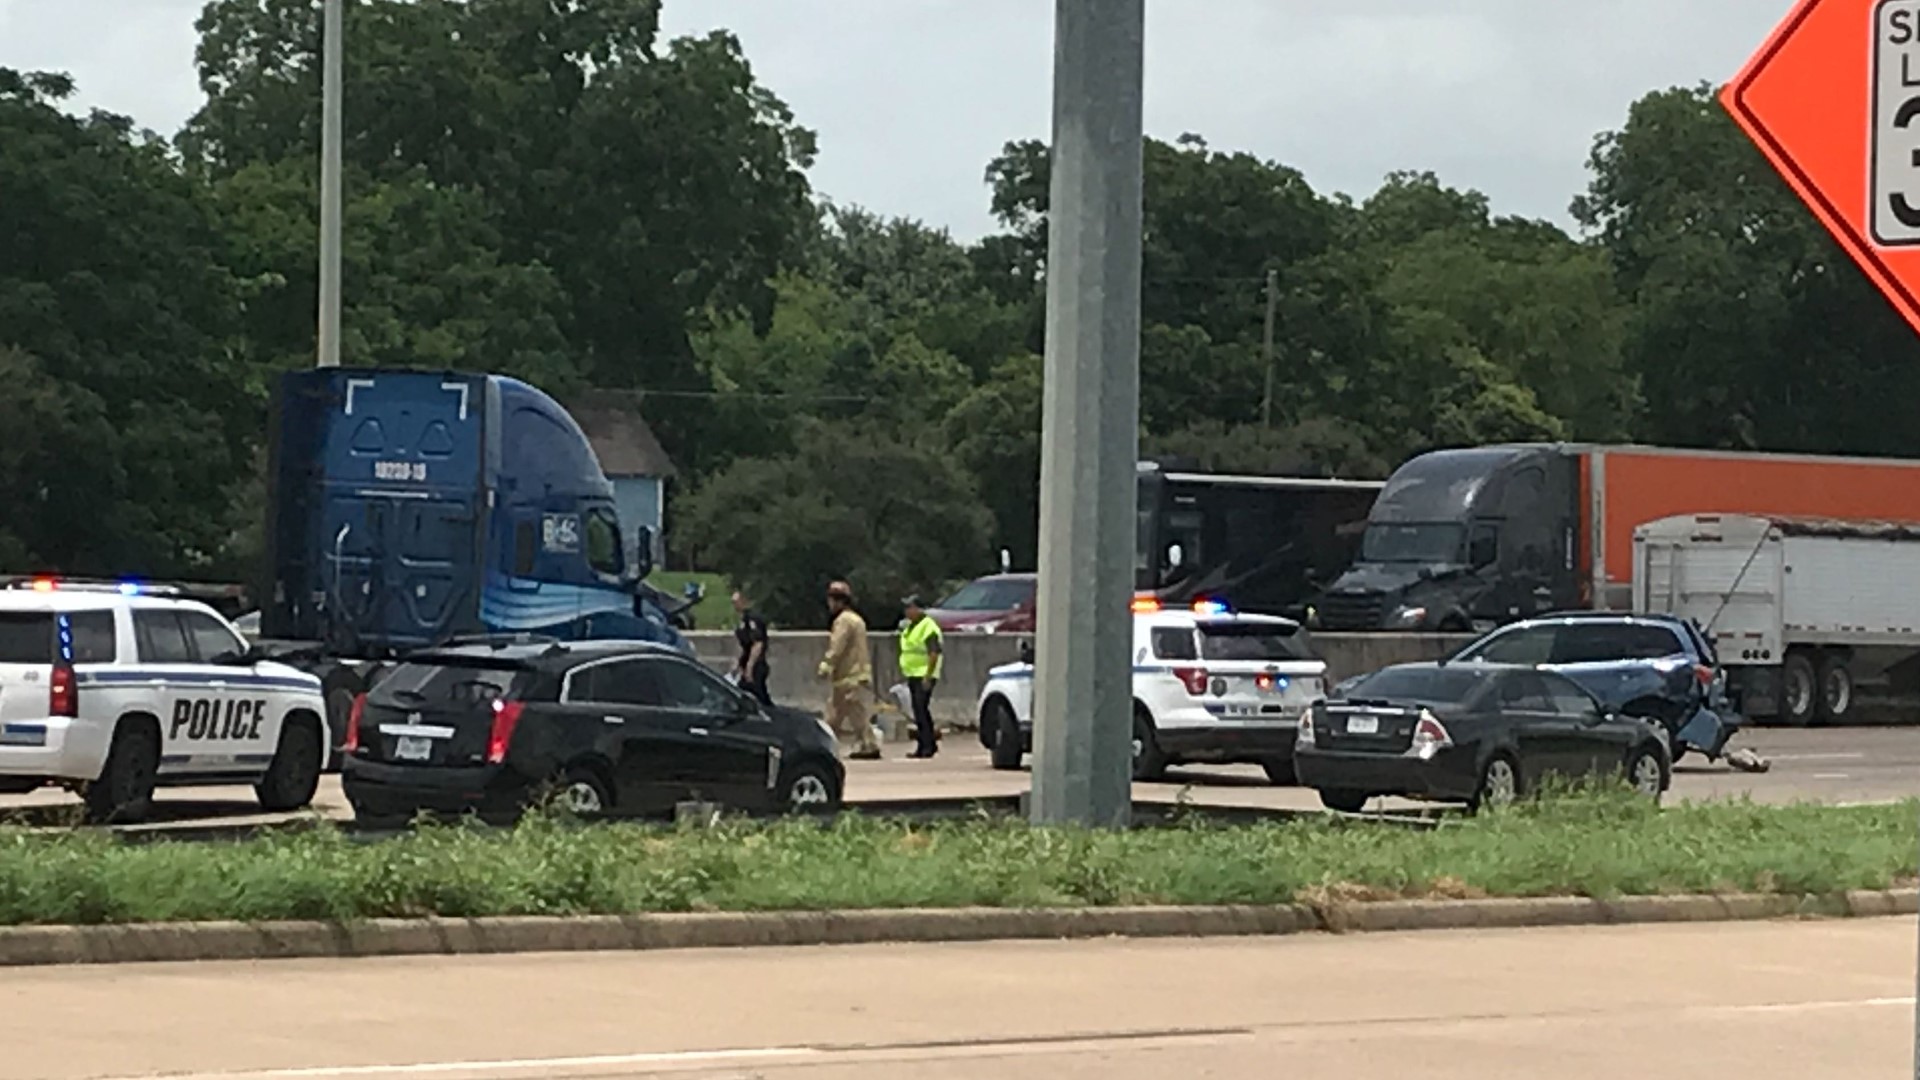 The Waco Fire Department said a major accident that happened around 1:50 p.m. on I-35 between South Valley Mills Drive and 18th Street caused three injuries. All I-35 northbound lanes in the area were blocked, the department said.